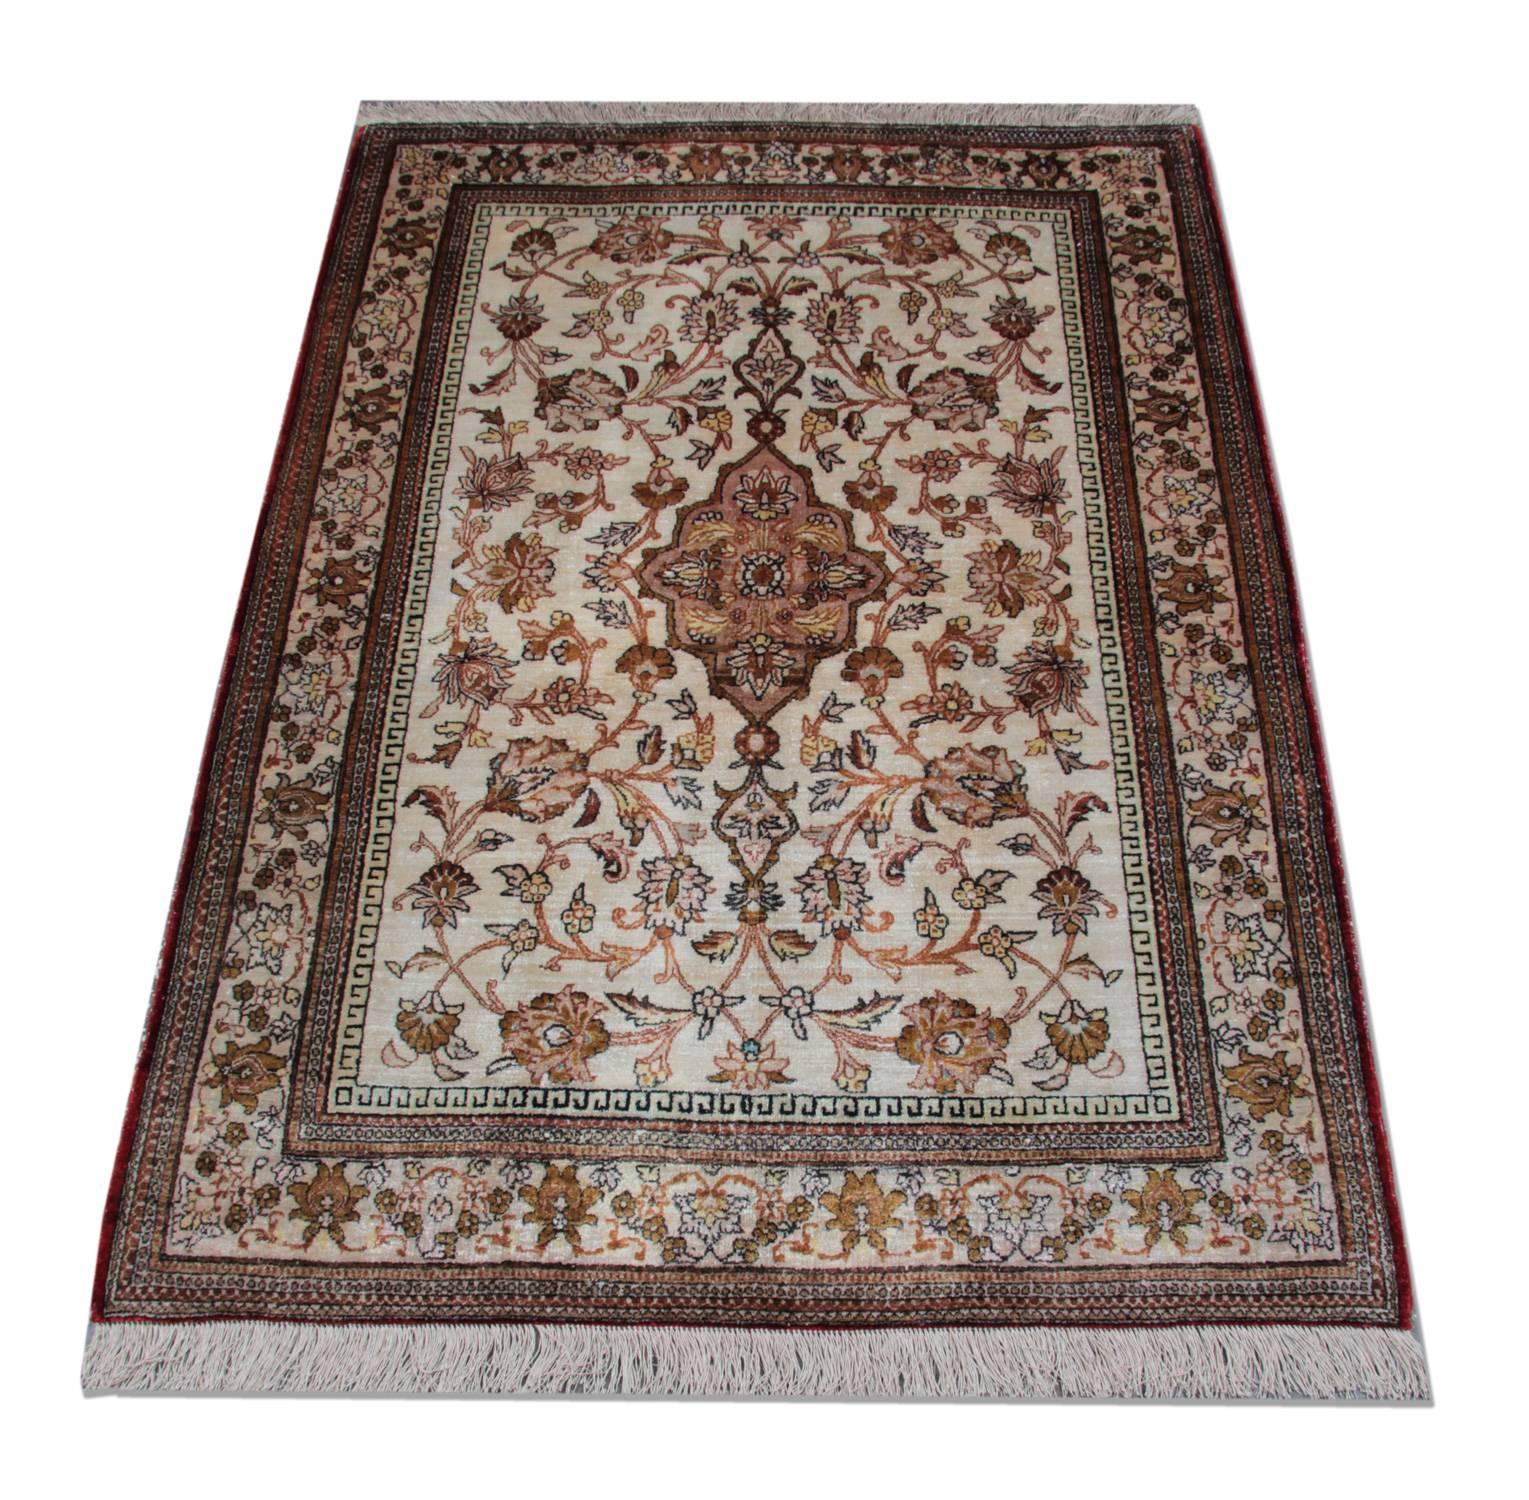 This fine silk area rug was woven by hand in Pakistan in 1960. The central design features a cream background that has been decorated with a central medallion and symmetrical surround design with wondering floral motifs, woven in beige, cream and